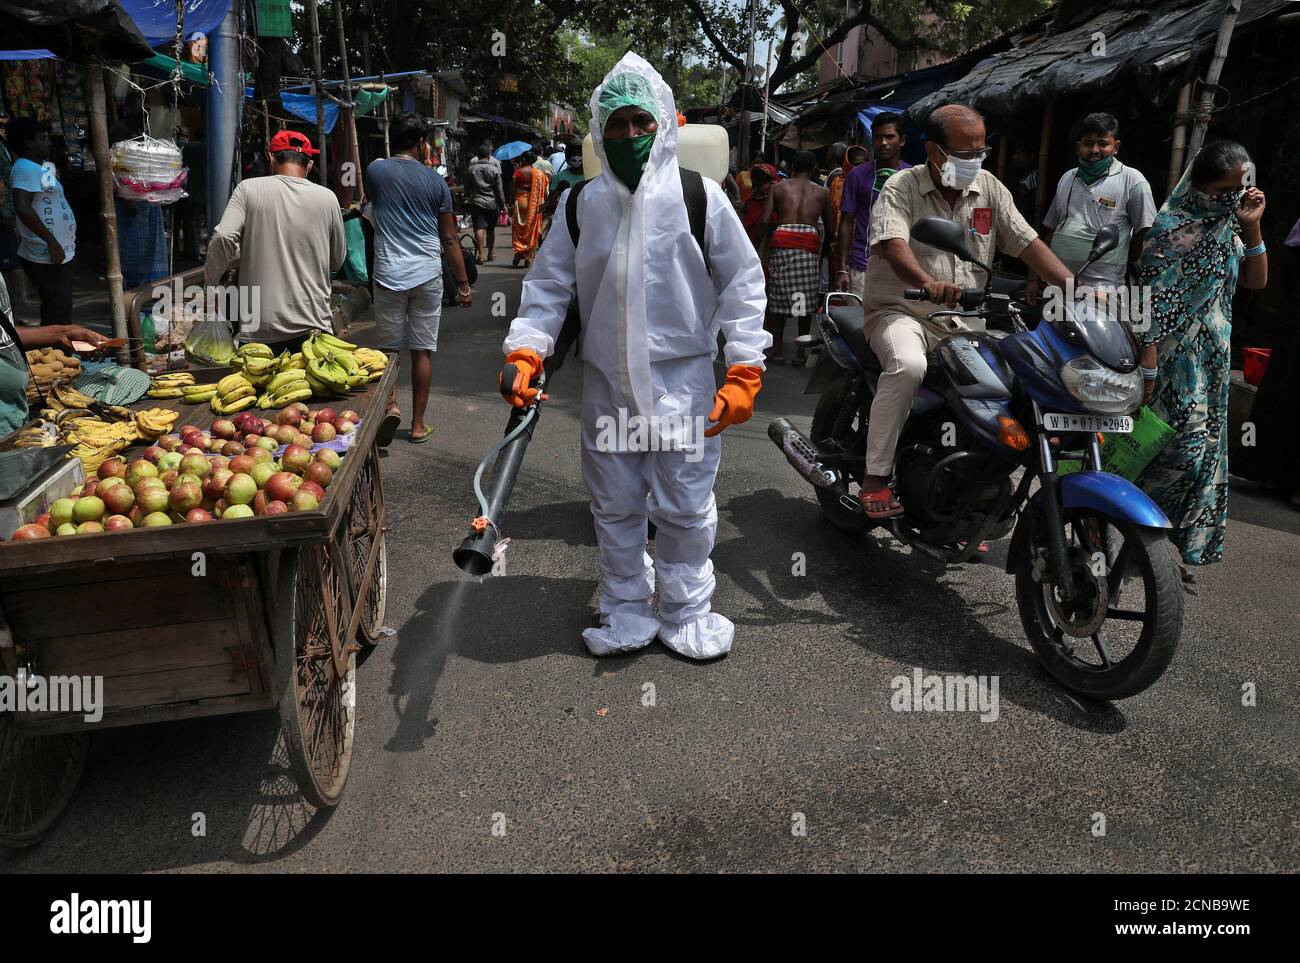 A municipal worker sprays disinfectant to sanitize a street amidst the spread of the coronavirus disease (COVID-19) in Kolkata, India, September 18, 2020. REUTERS/Rupak De Chowdhuri Stock Photo